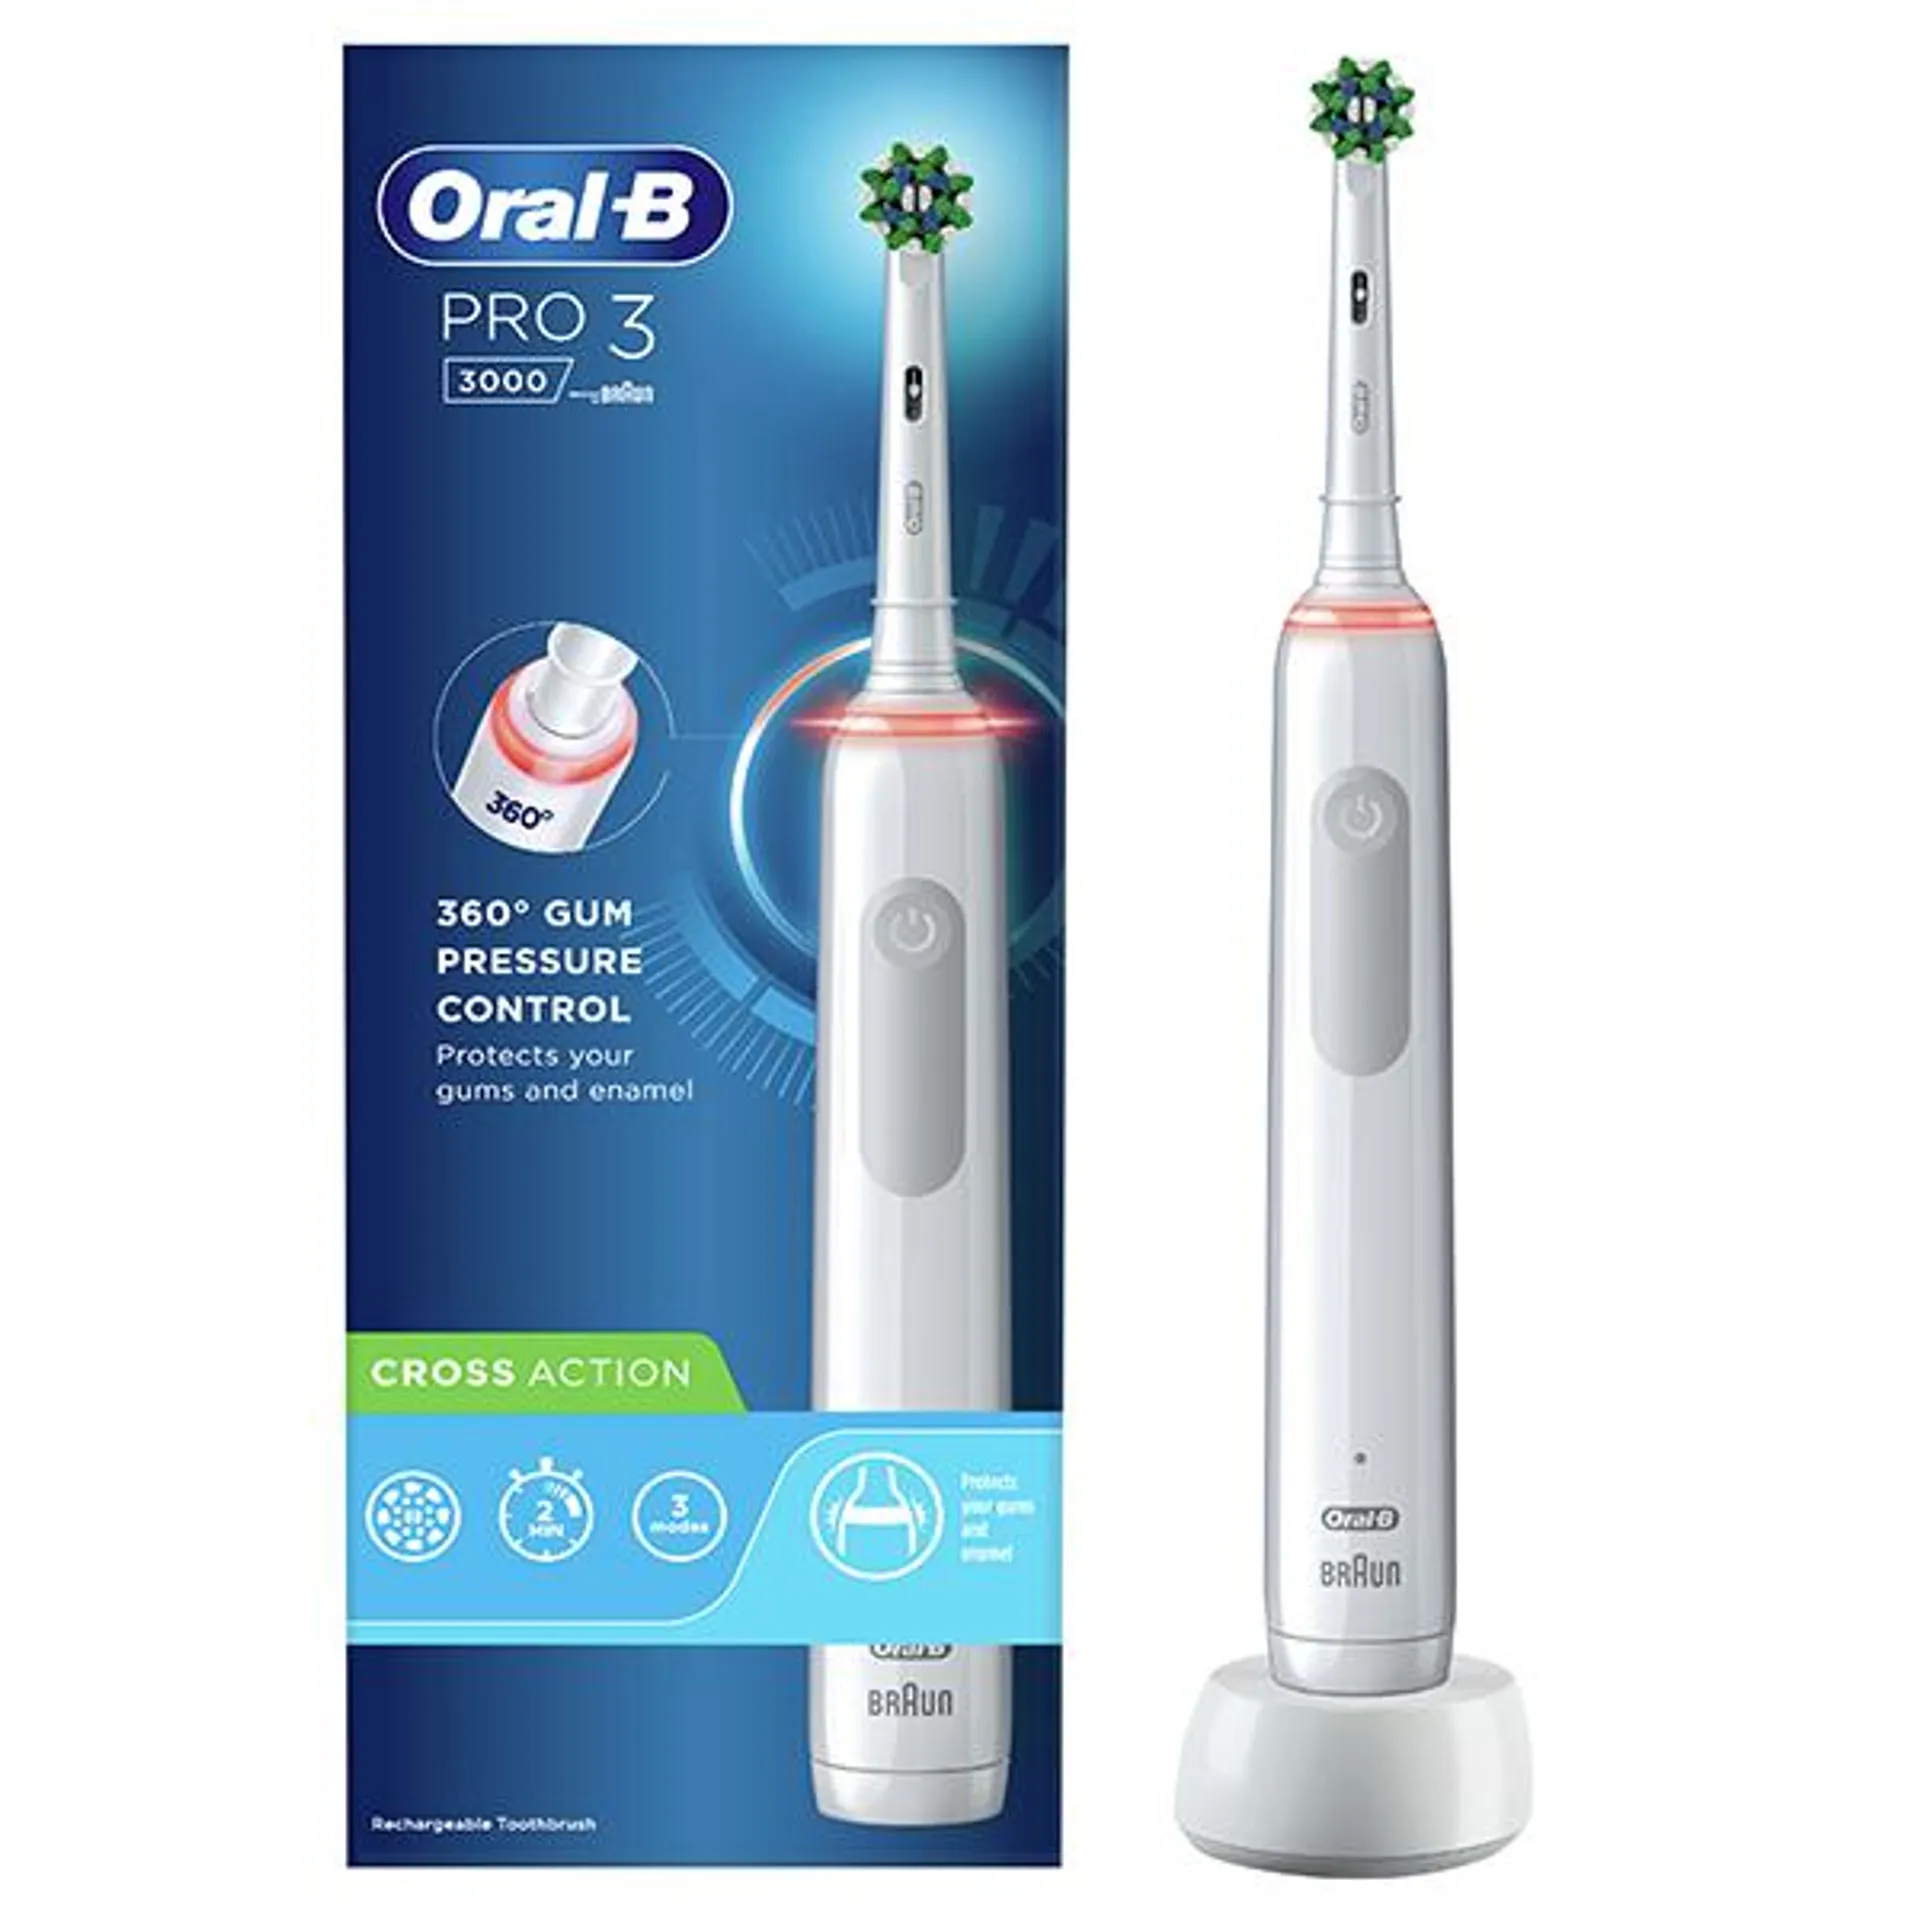 Oral-B Pro 3 3000 CrossAction White Electric Rechargeable Toothbrush